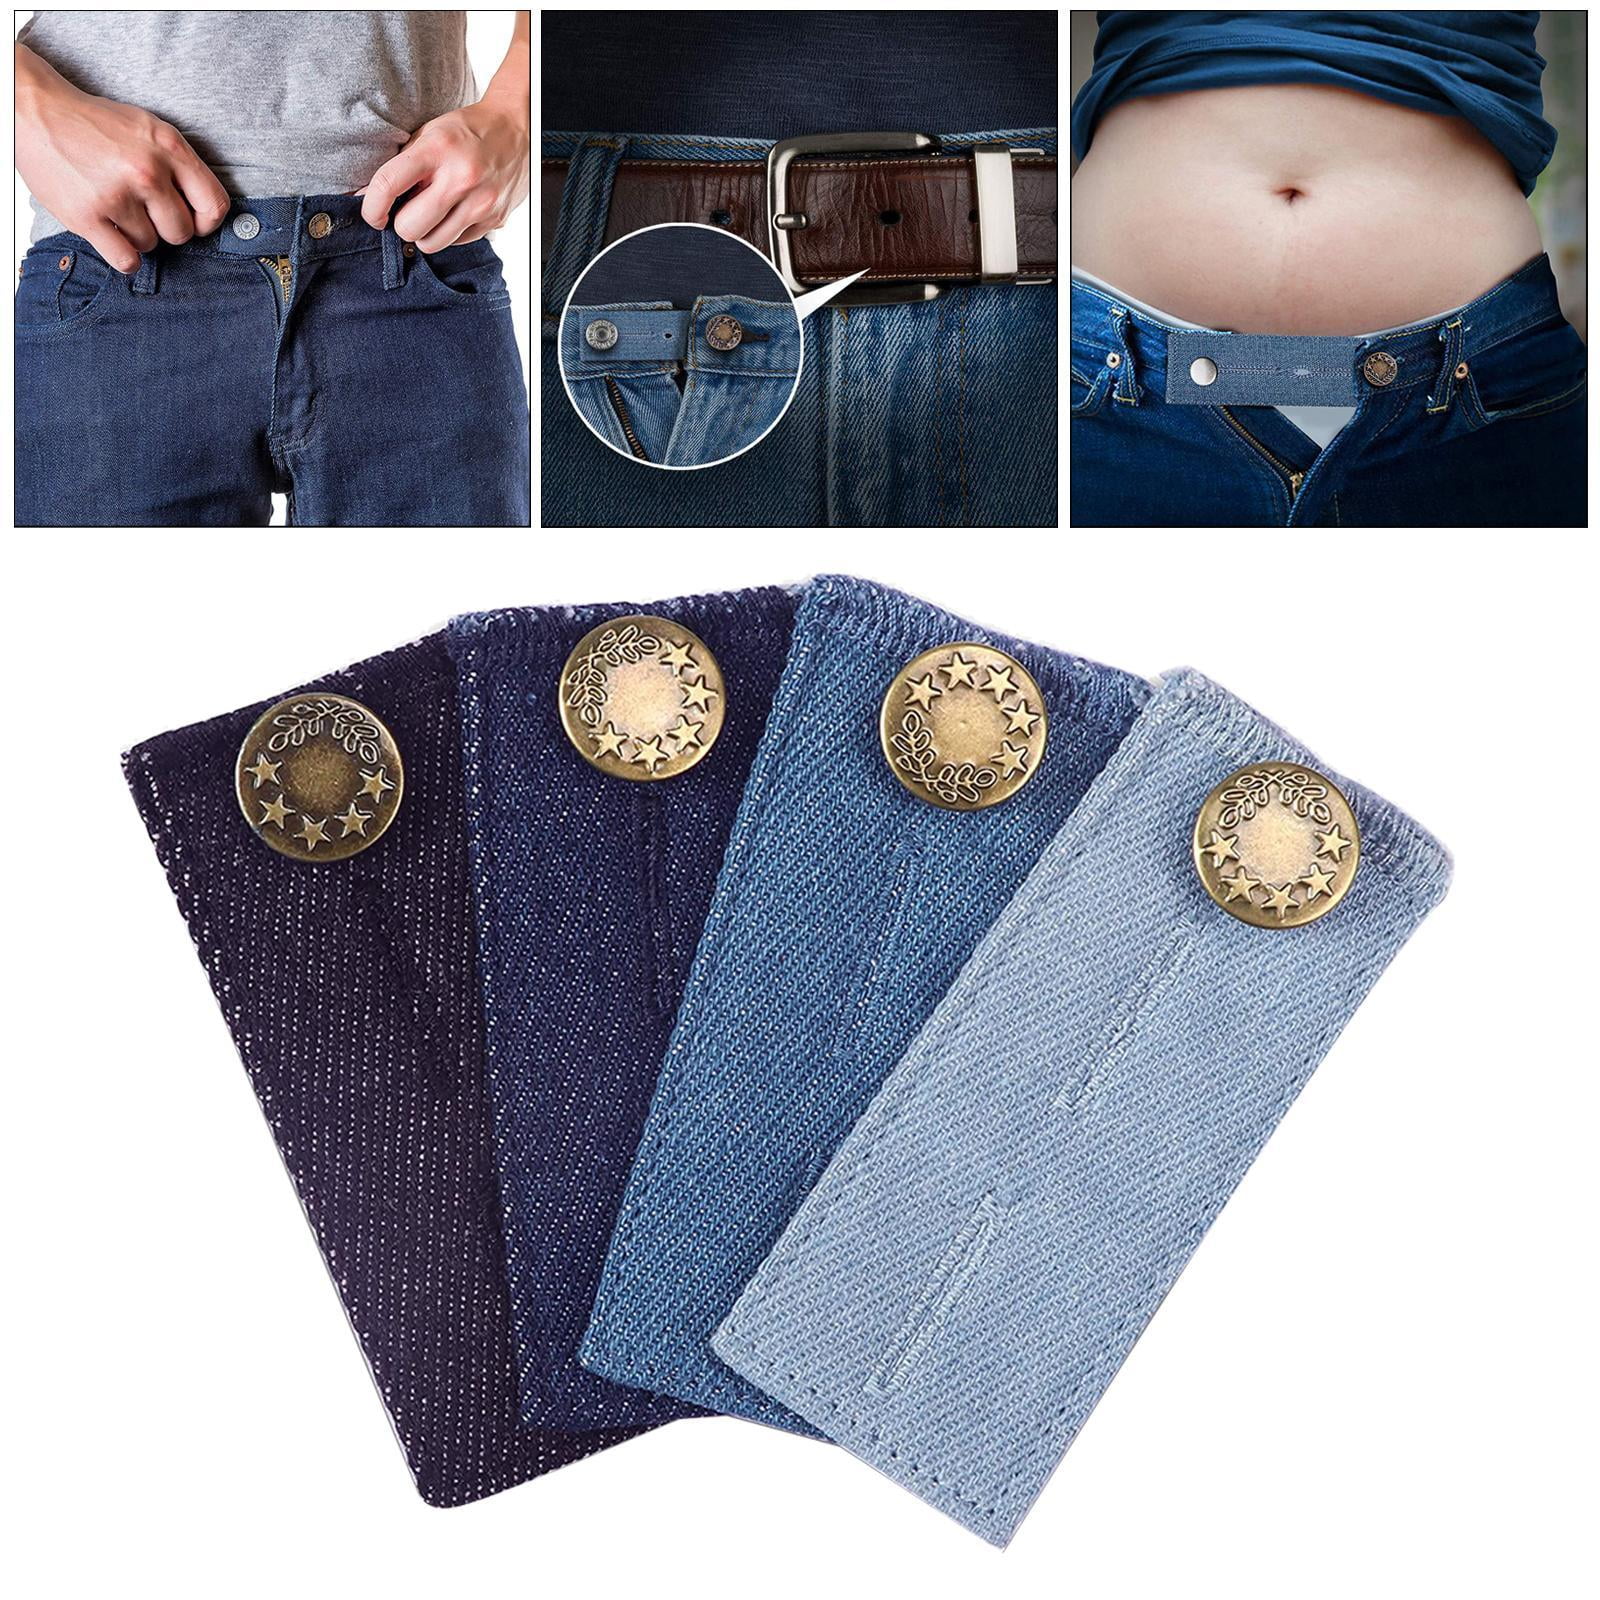  5-Pack Pant Waist Extenders with Buttons, Adjustable Waistband  Expanders, Fabric Pants, Khakis, Jean Button Extender, Cotton Maternity  Extender, 5 Colors : Arts, Crafts & Sewing